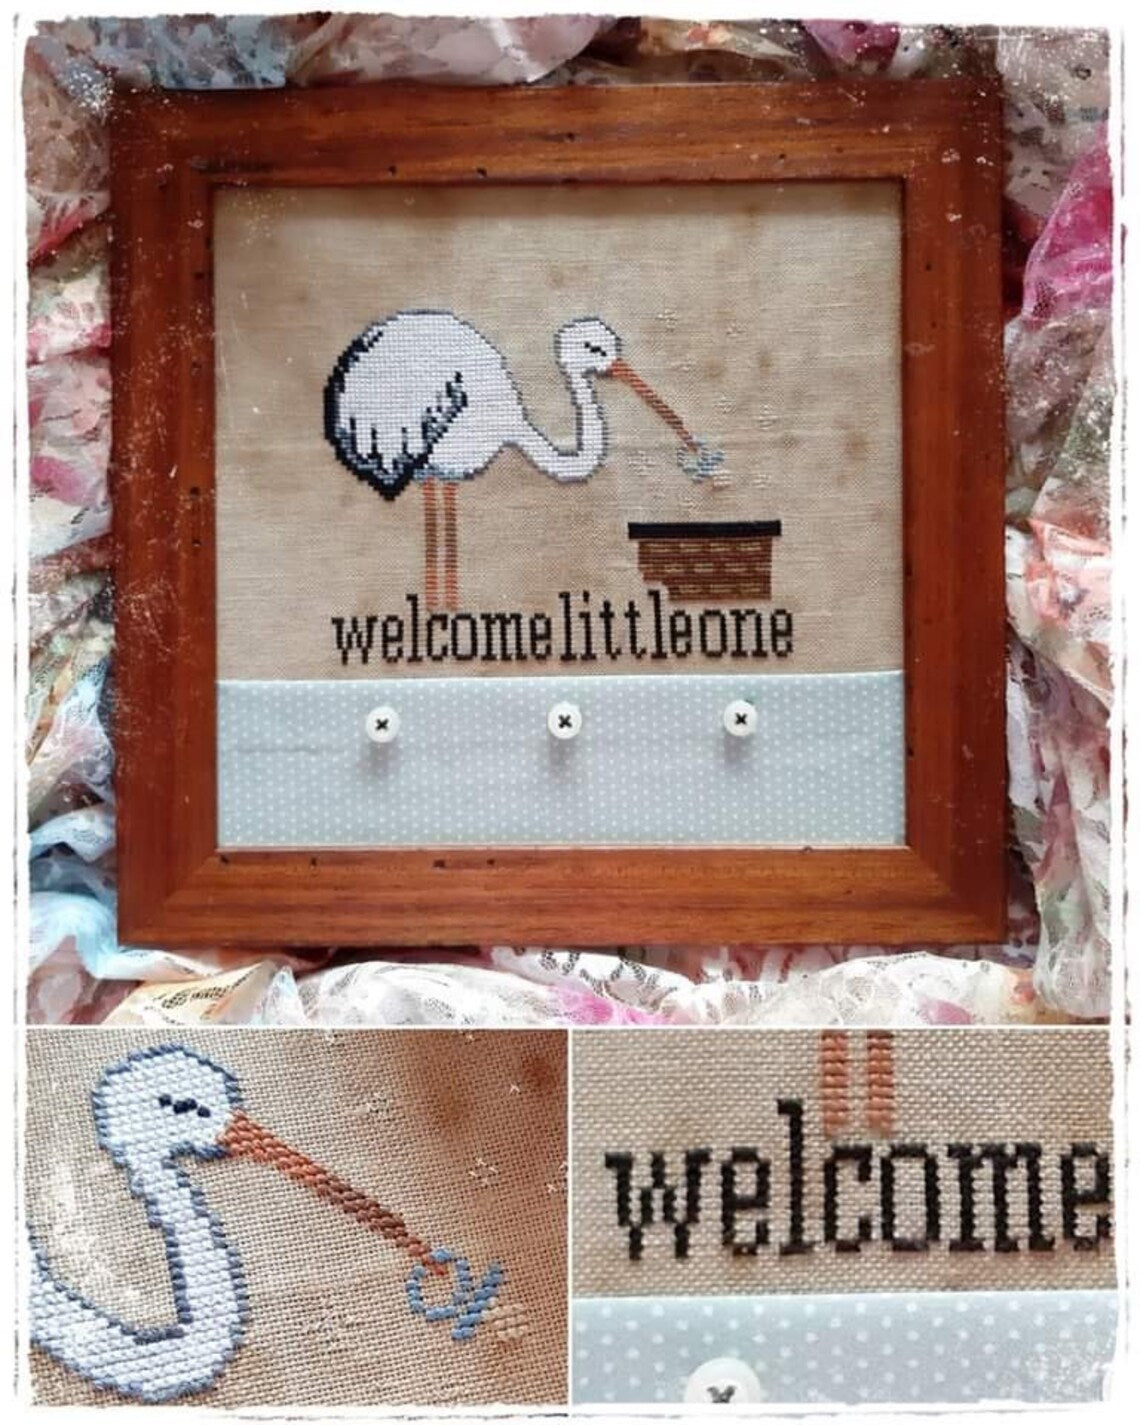 FWW - Welcome Little One